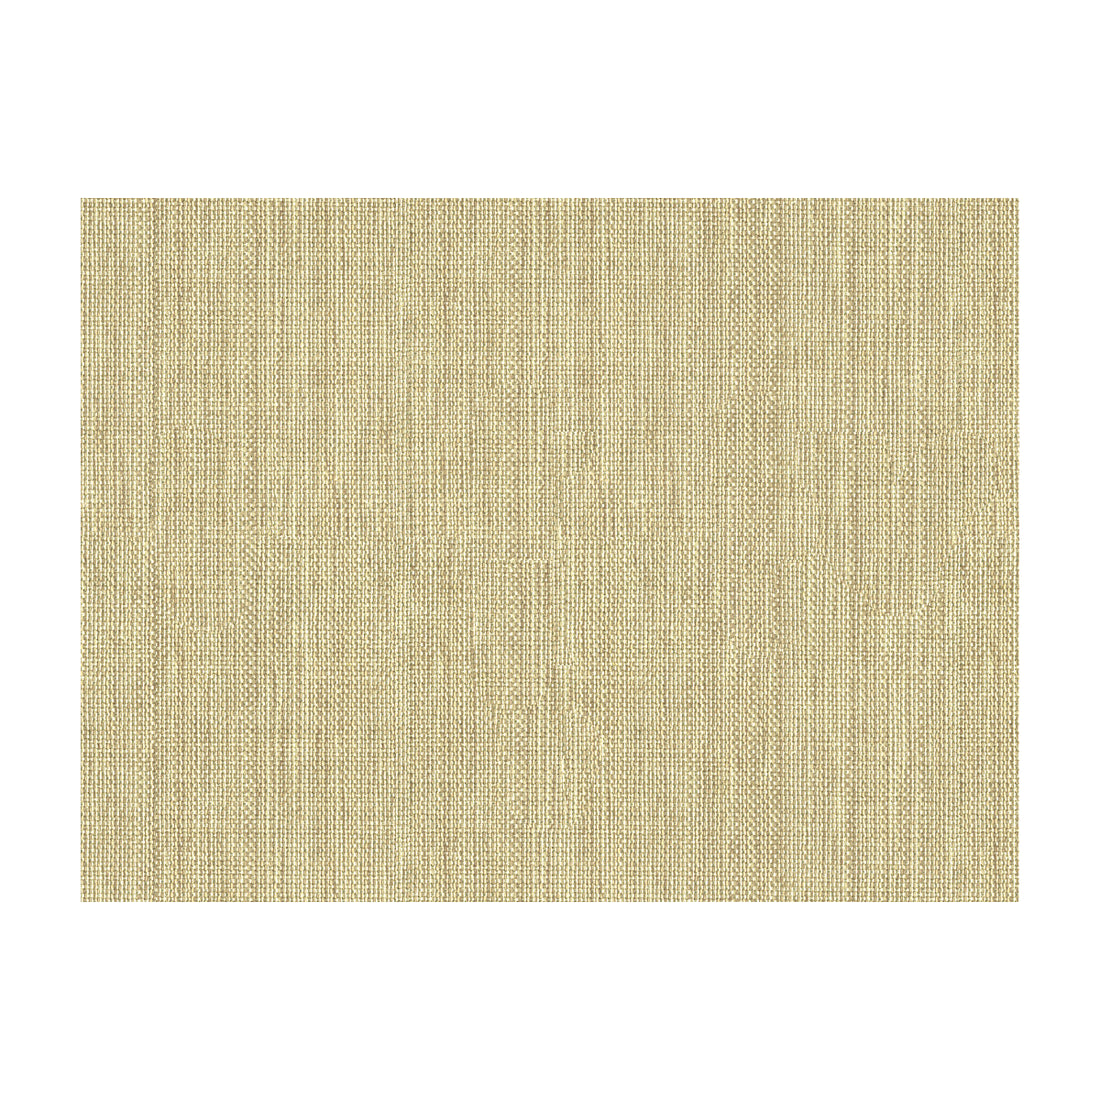 Kravet Basics fabric in 30299-1006 color - pattern 30299.1006.0 - by Kravet Basics in the Perfect Plains collection